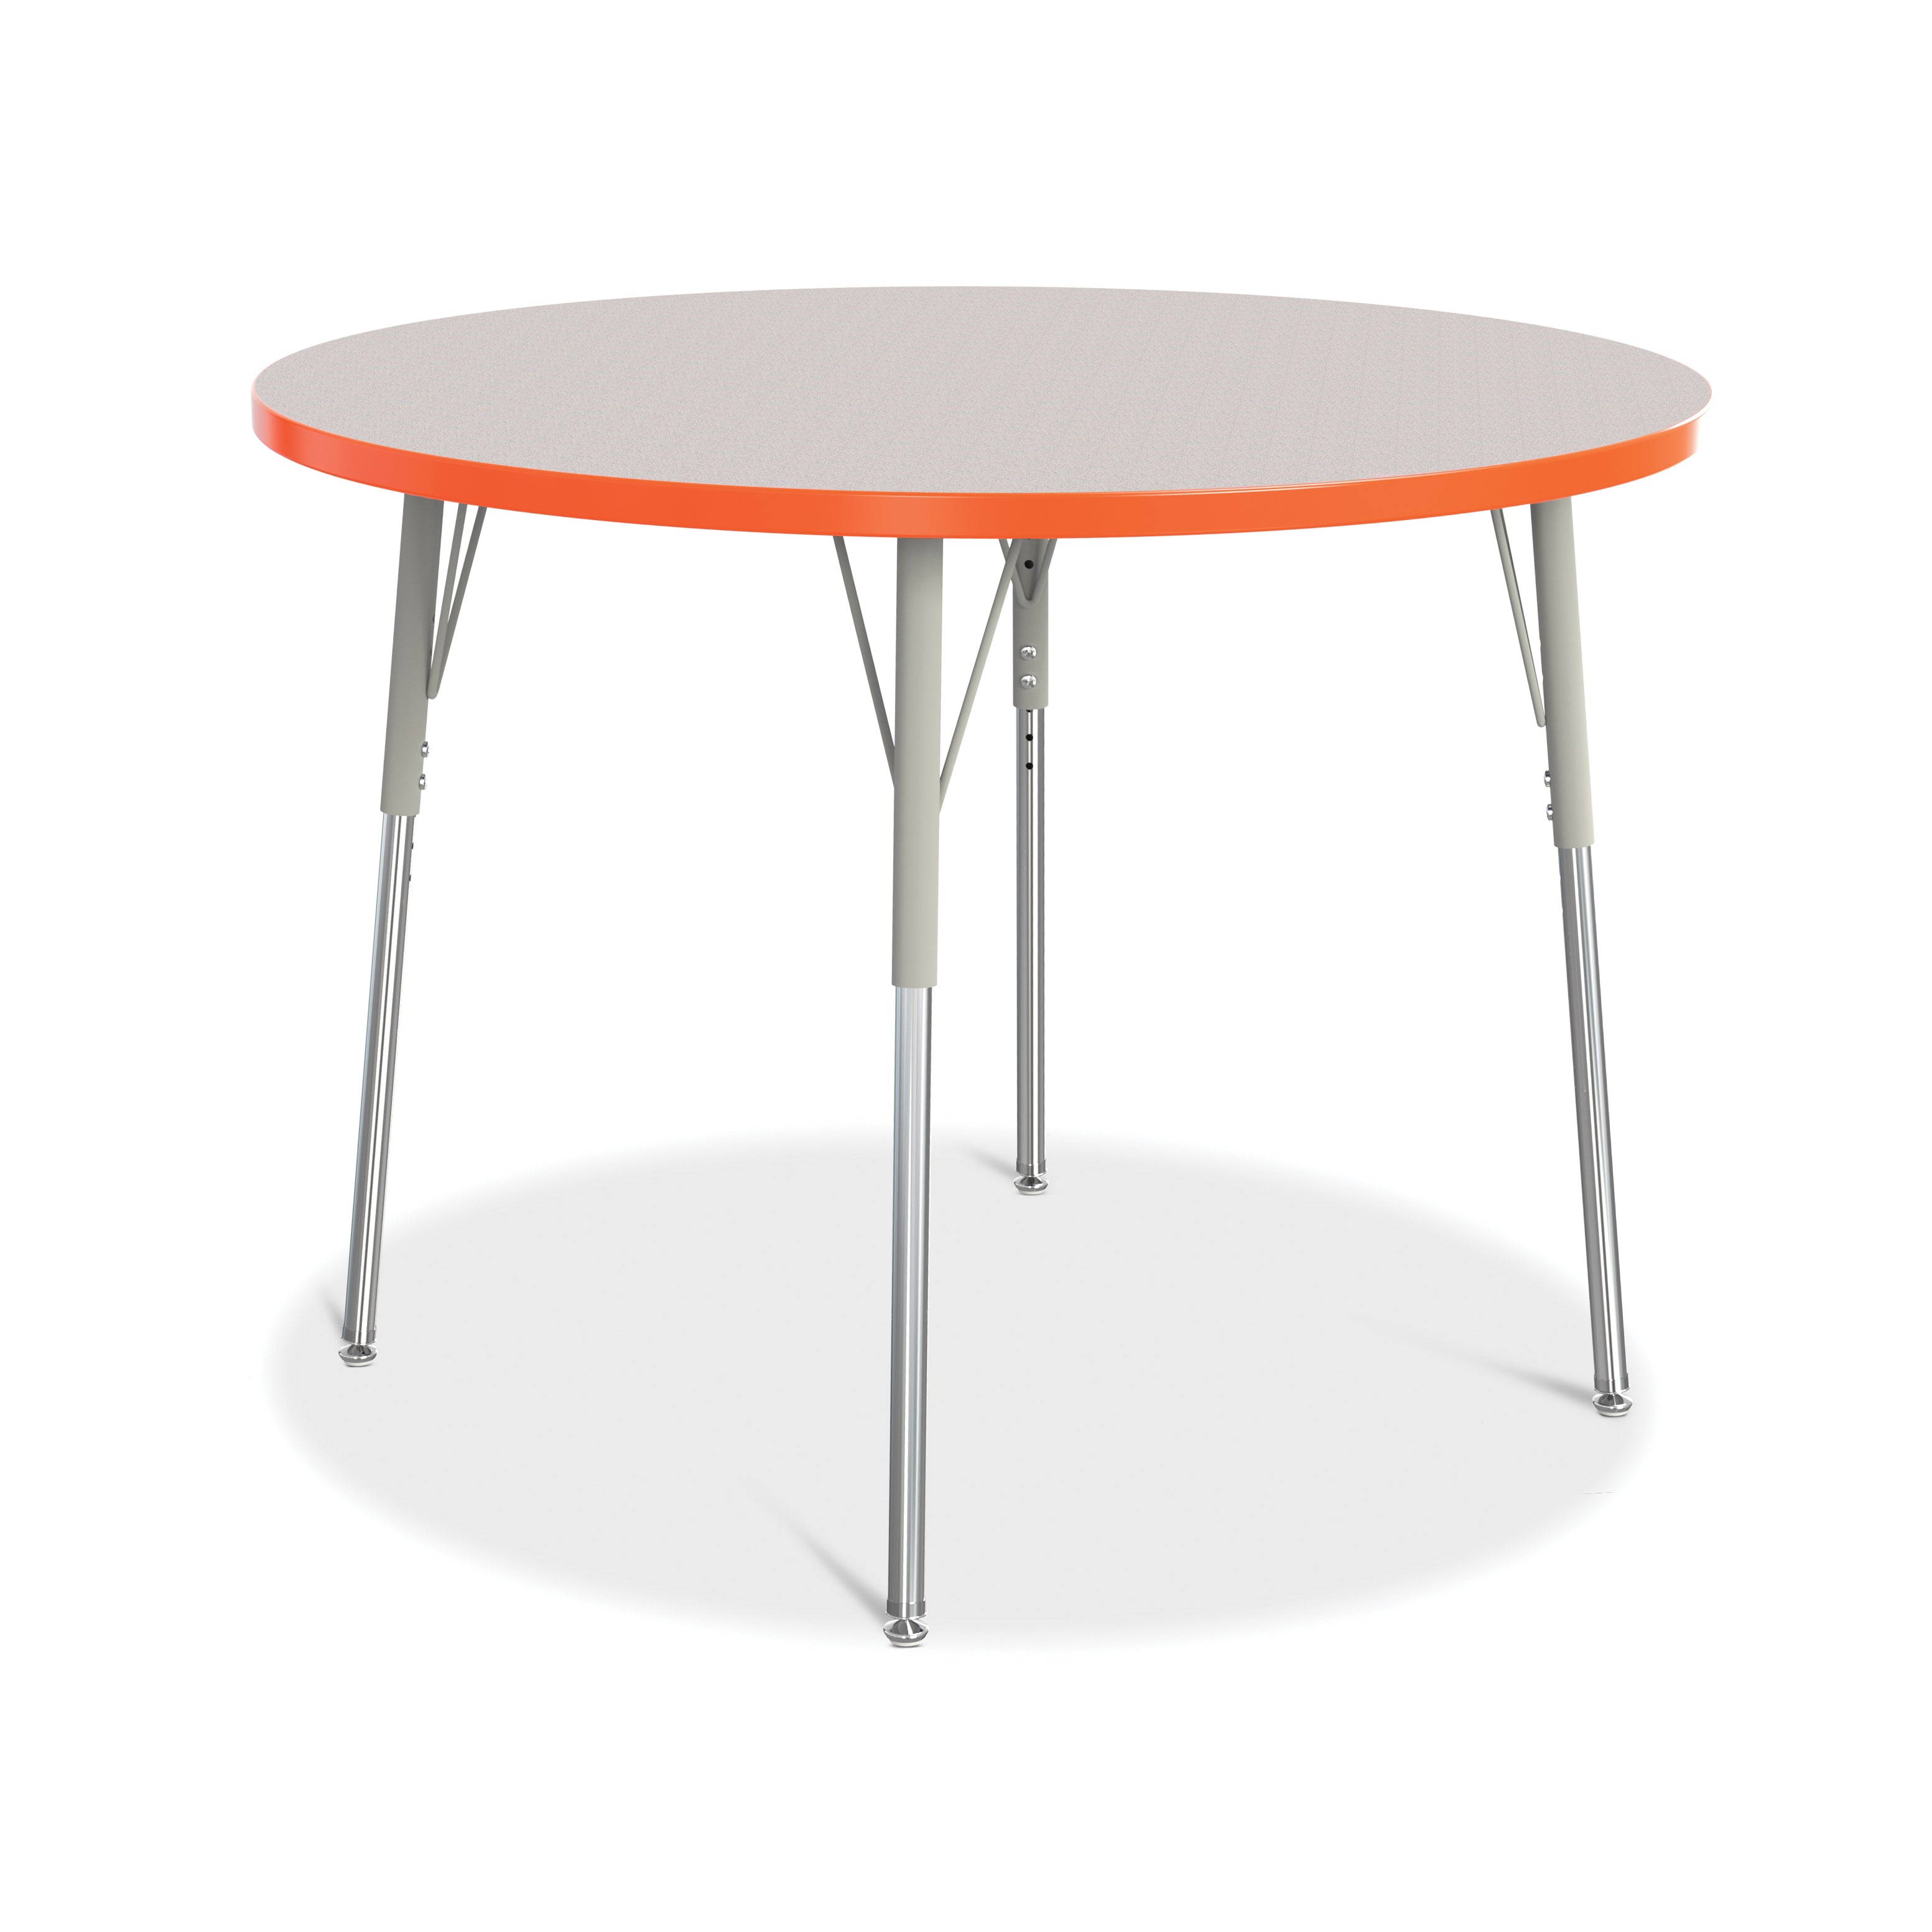 6468JCA114, Berries Round Activity Table - 42" Diameter, A-height - Freckled Gray/Orange/Gray